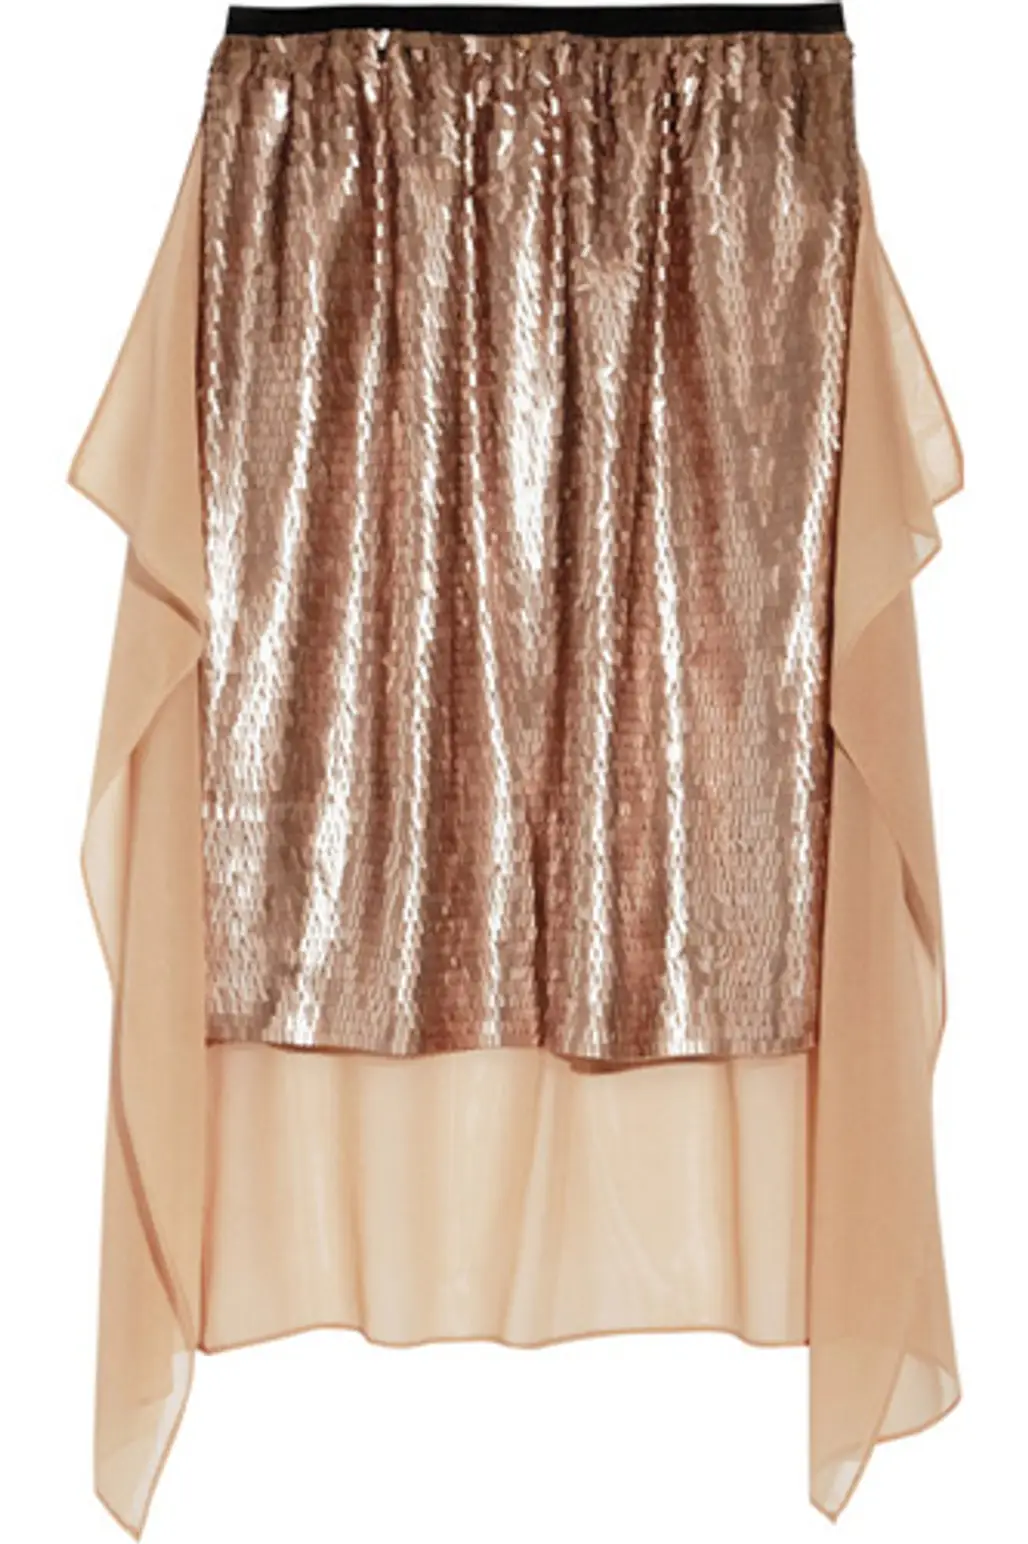 DKNY Sequined Stretch Silk Skirt